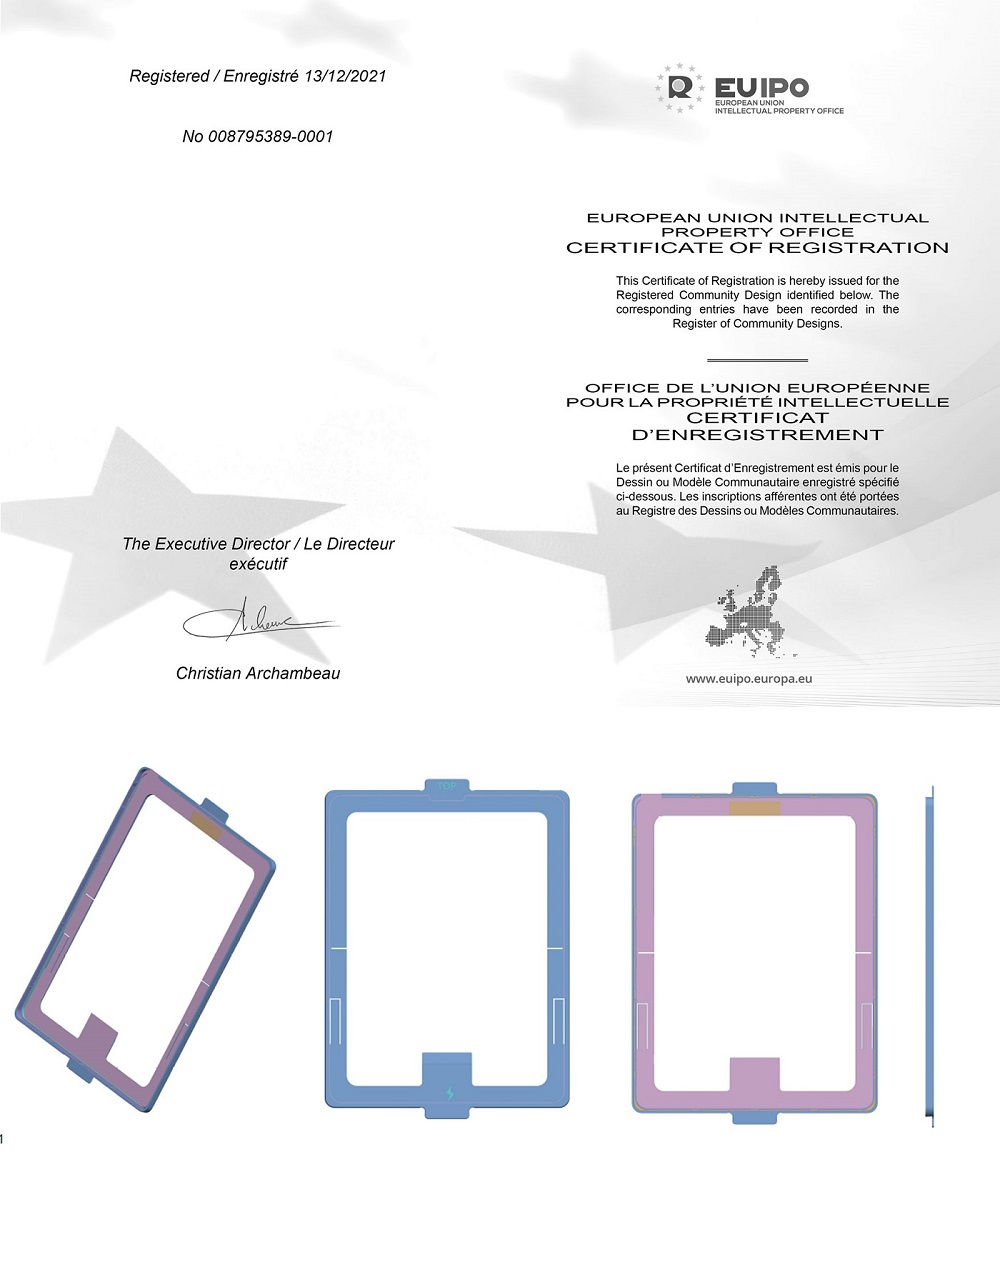 blind intallation tray gets patent approved both EU and U.S.A